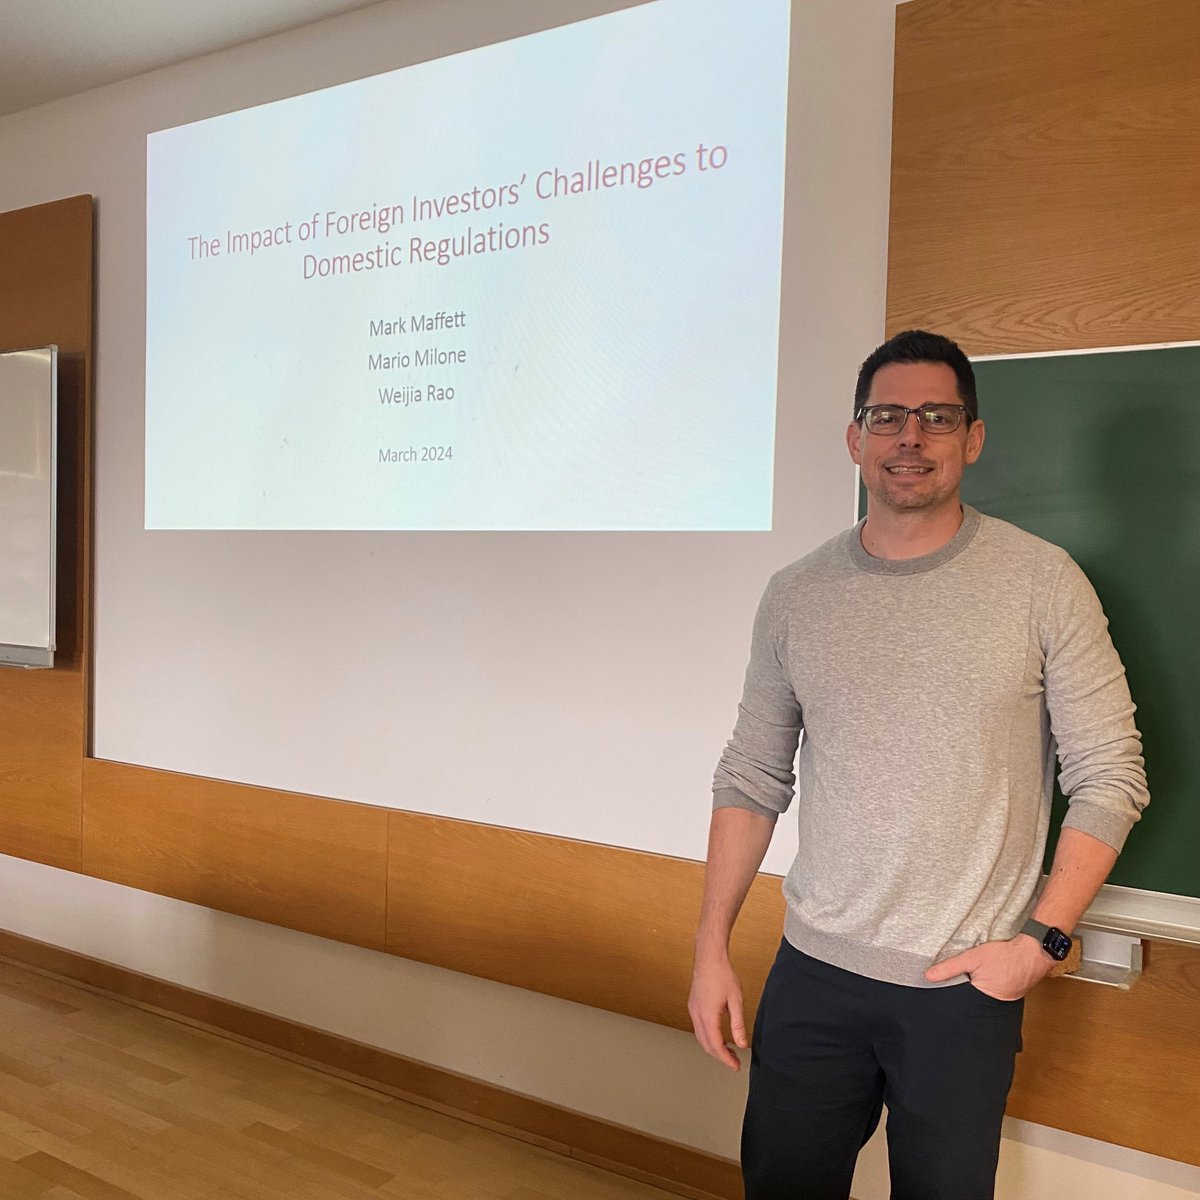 How do foreign investors' challenges impact host-country regulations? Mark Maffet (@univmiami) tackled this question in the last #trr266 seminar series, presenting his research insights on the topic. Thank you very much for your visit - we enjoyed discussing research with you!